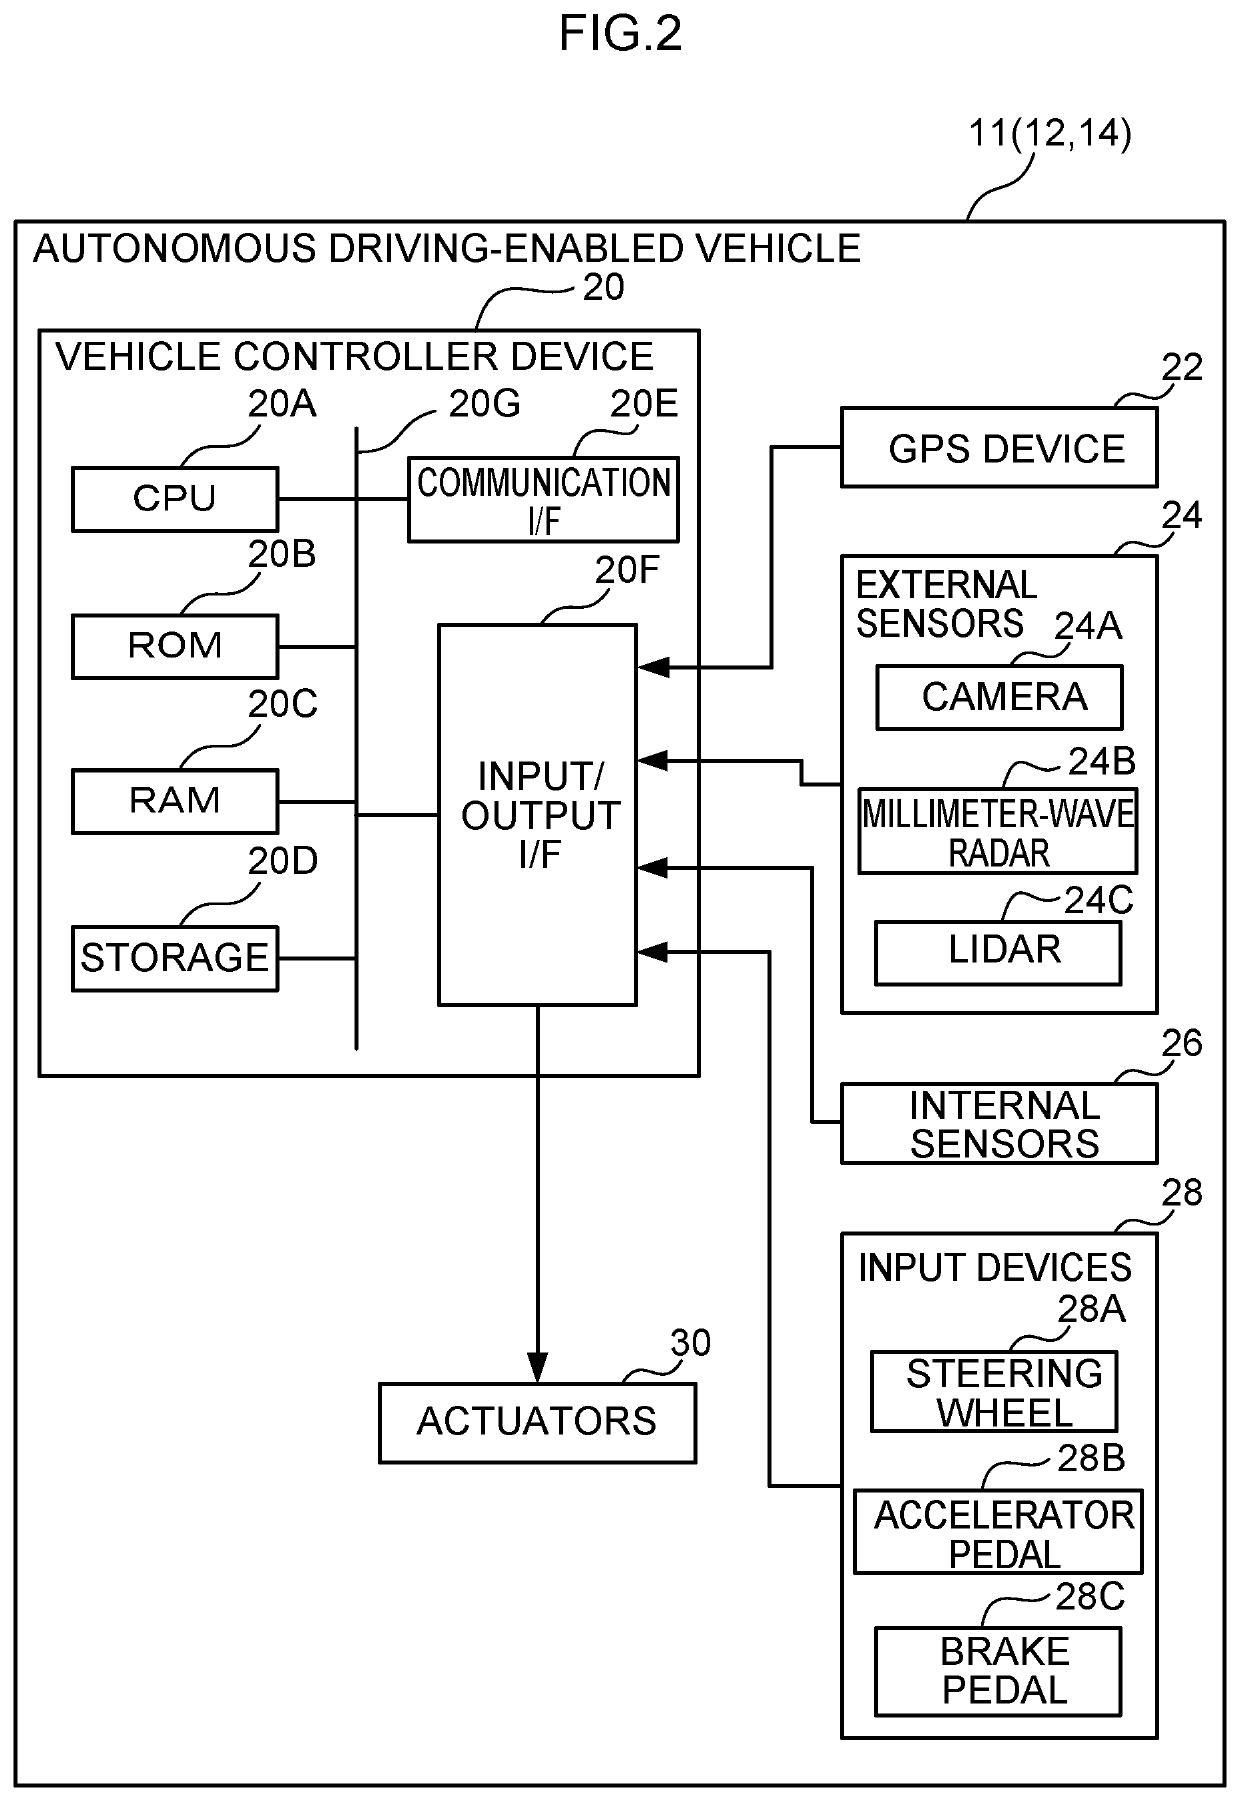 Vehicle controller device and vehicle control system